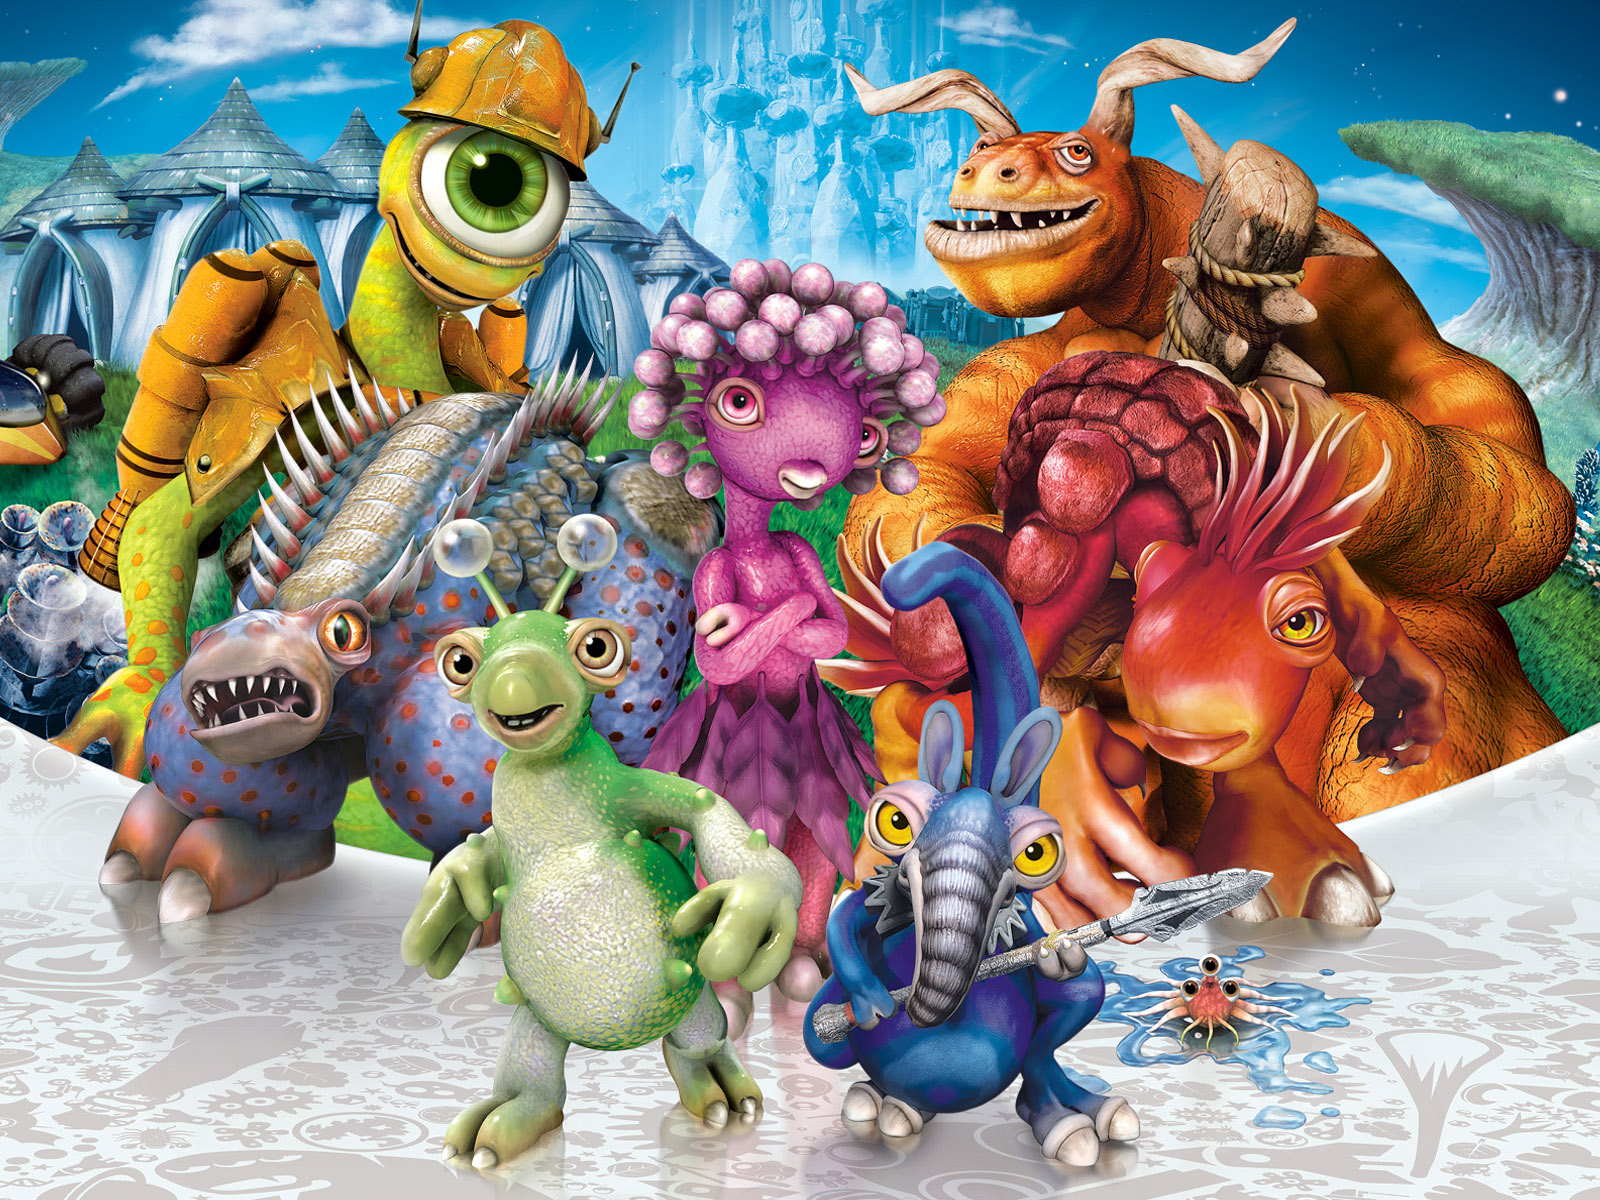 Spore Games Wallpaper And Image Pictures